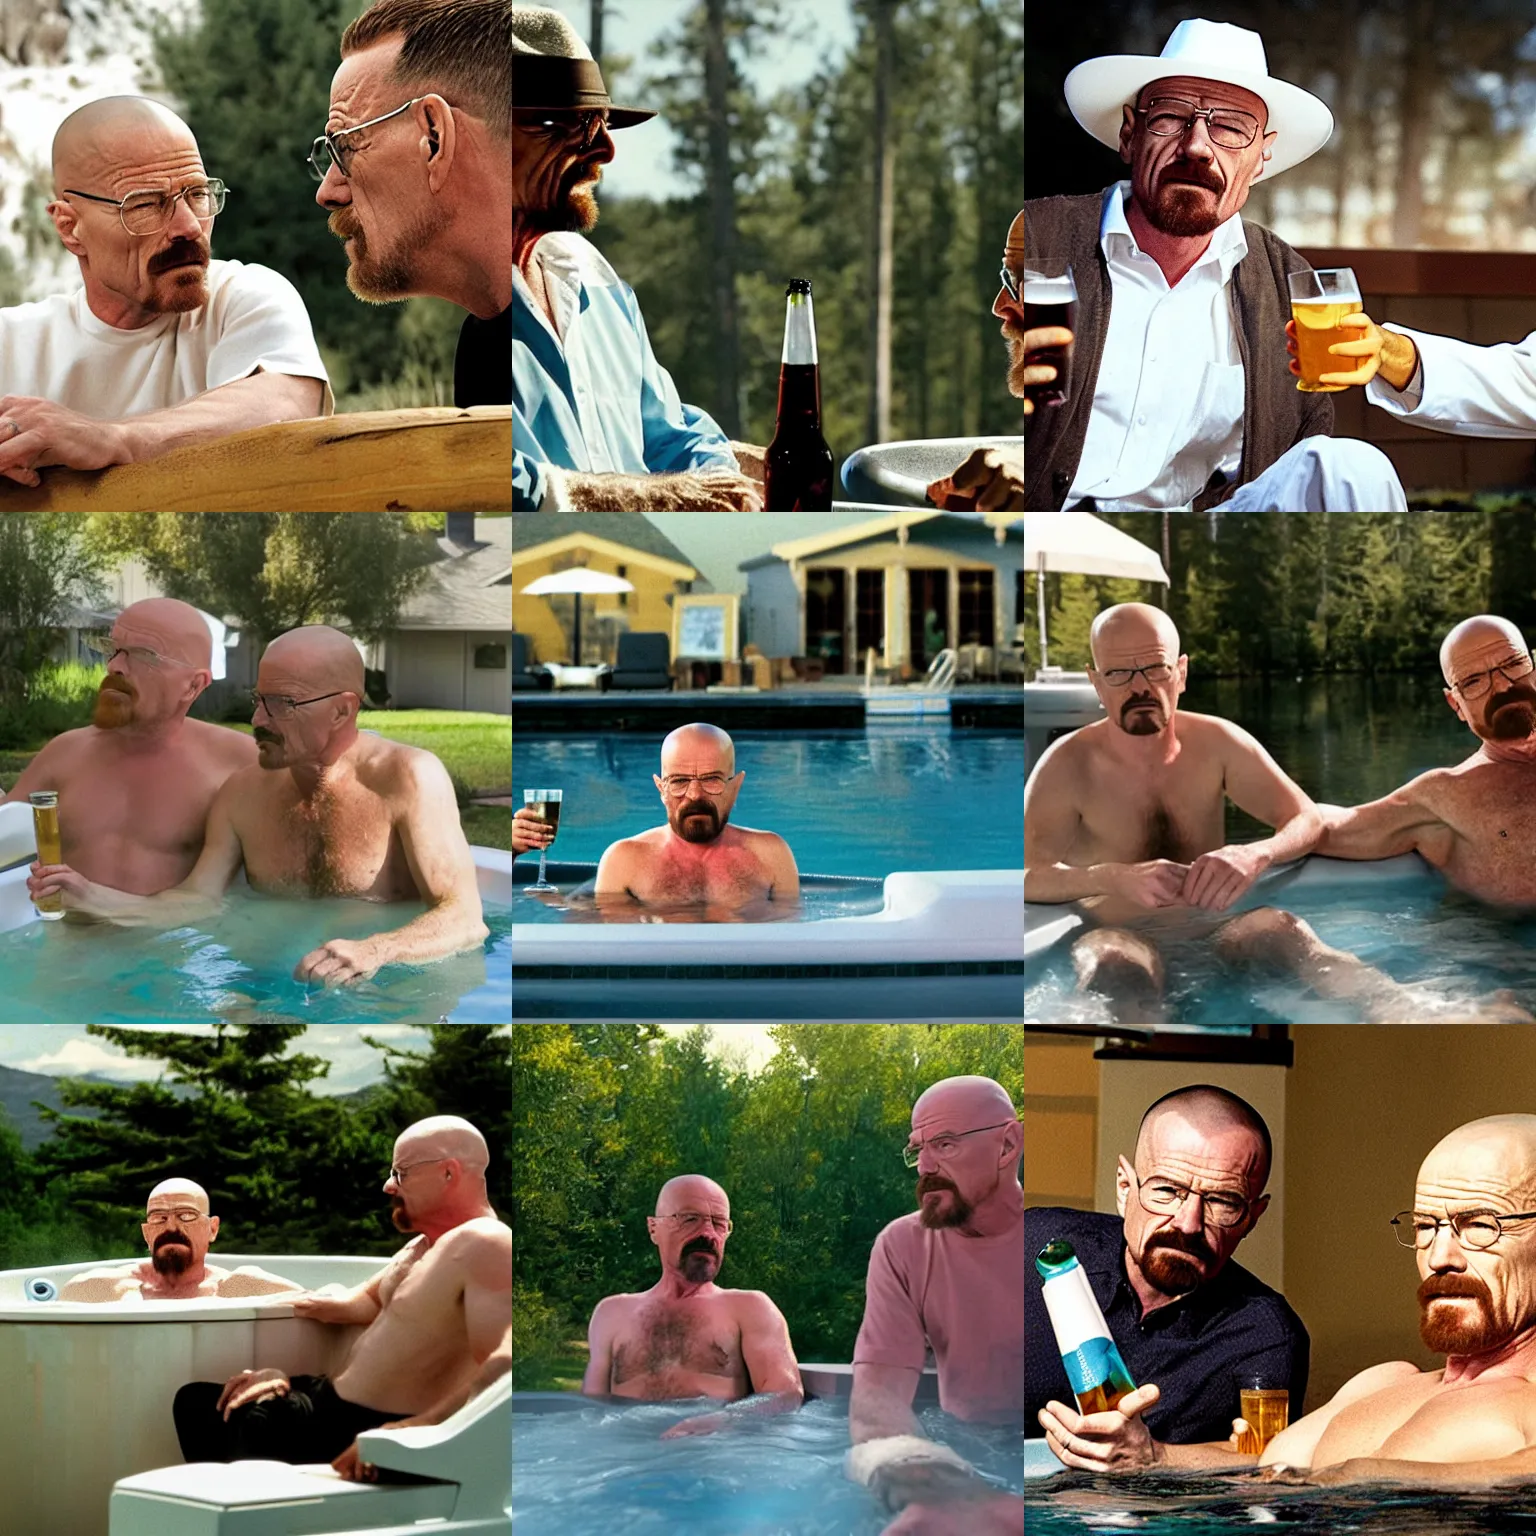 Prompt: Walter White sitting in a hot tub next to Walter White, who is himself talking to yet another Walter White standing outside the hot tub, holding a beer